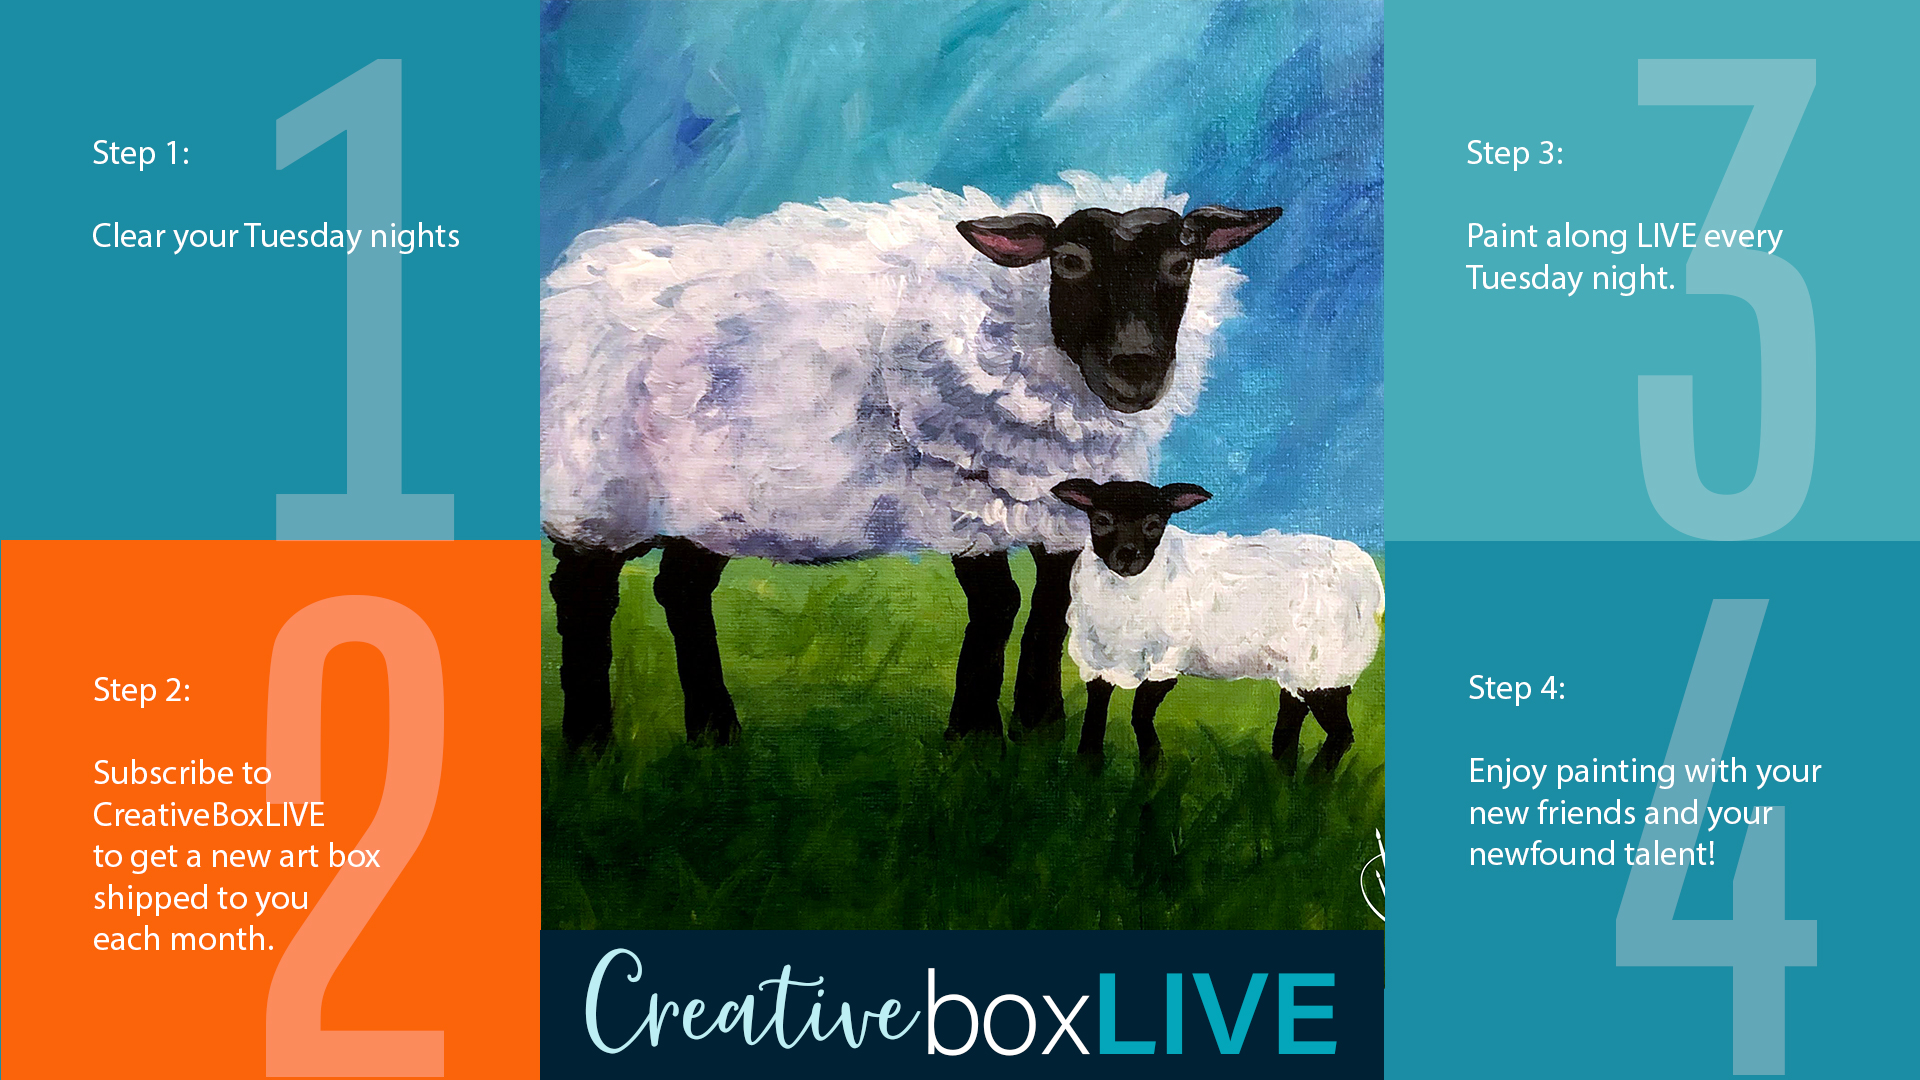 Mama Sheep CBL with CreativeBoxLIVE from Creatively Uncorked http://creativelyuncorked.com/